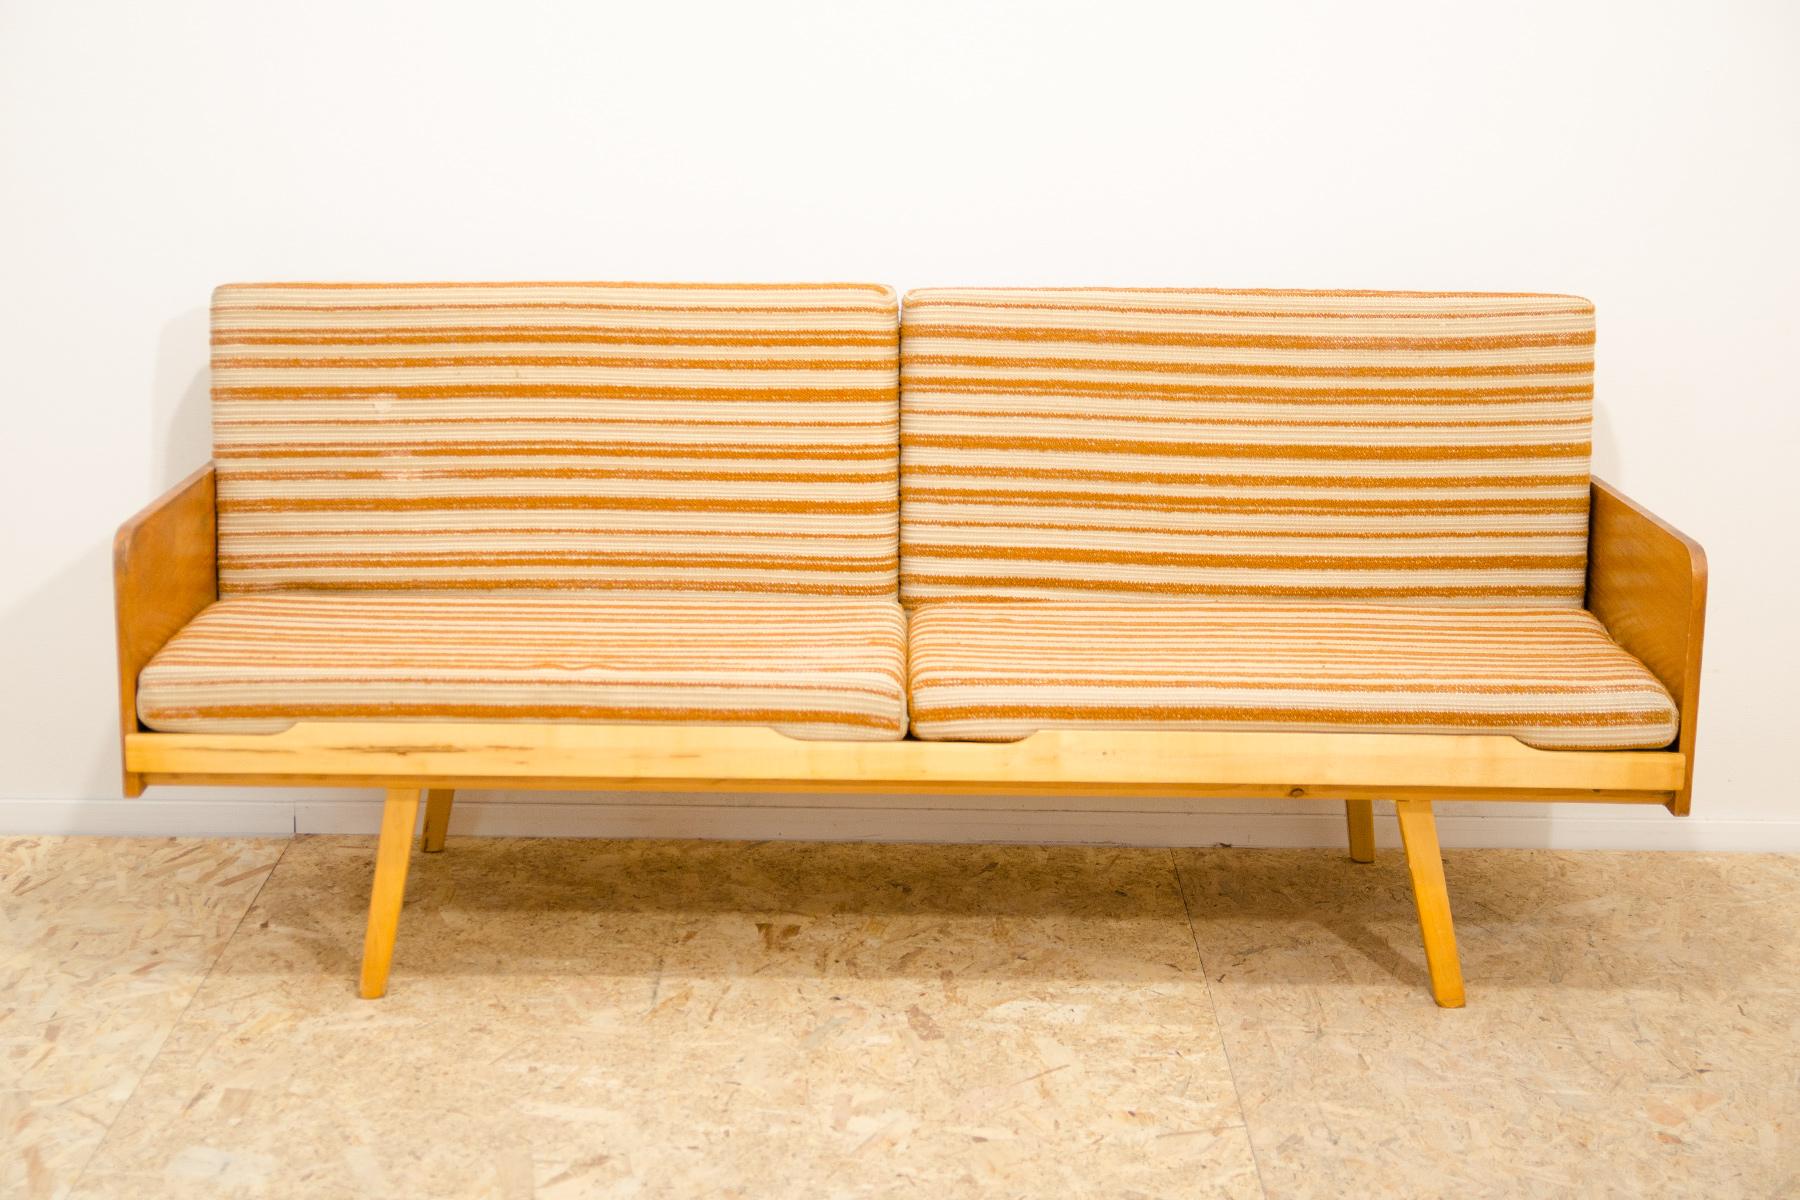 Mid century bench or sofa from Interiér Praha. It was made in the former Czechoslovakia in the 1960´s. This sofa has a wooden structure that is veneered in beech wood. The mattresses are rather soft. The sofa is in very good Vintage